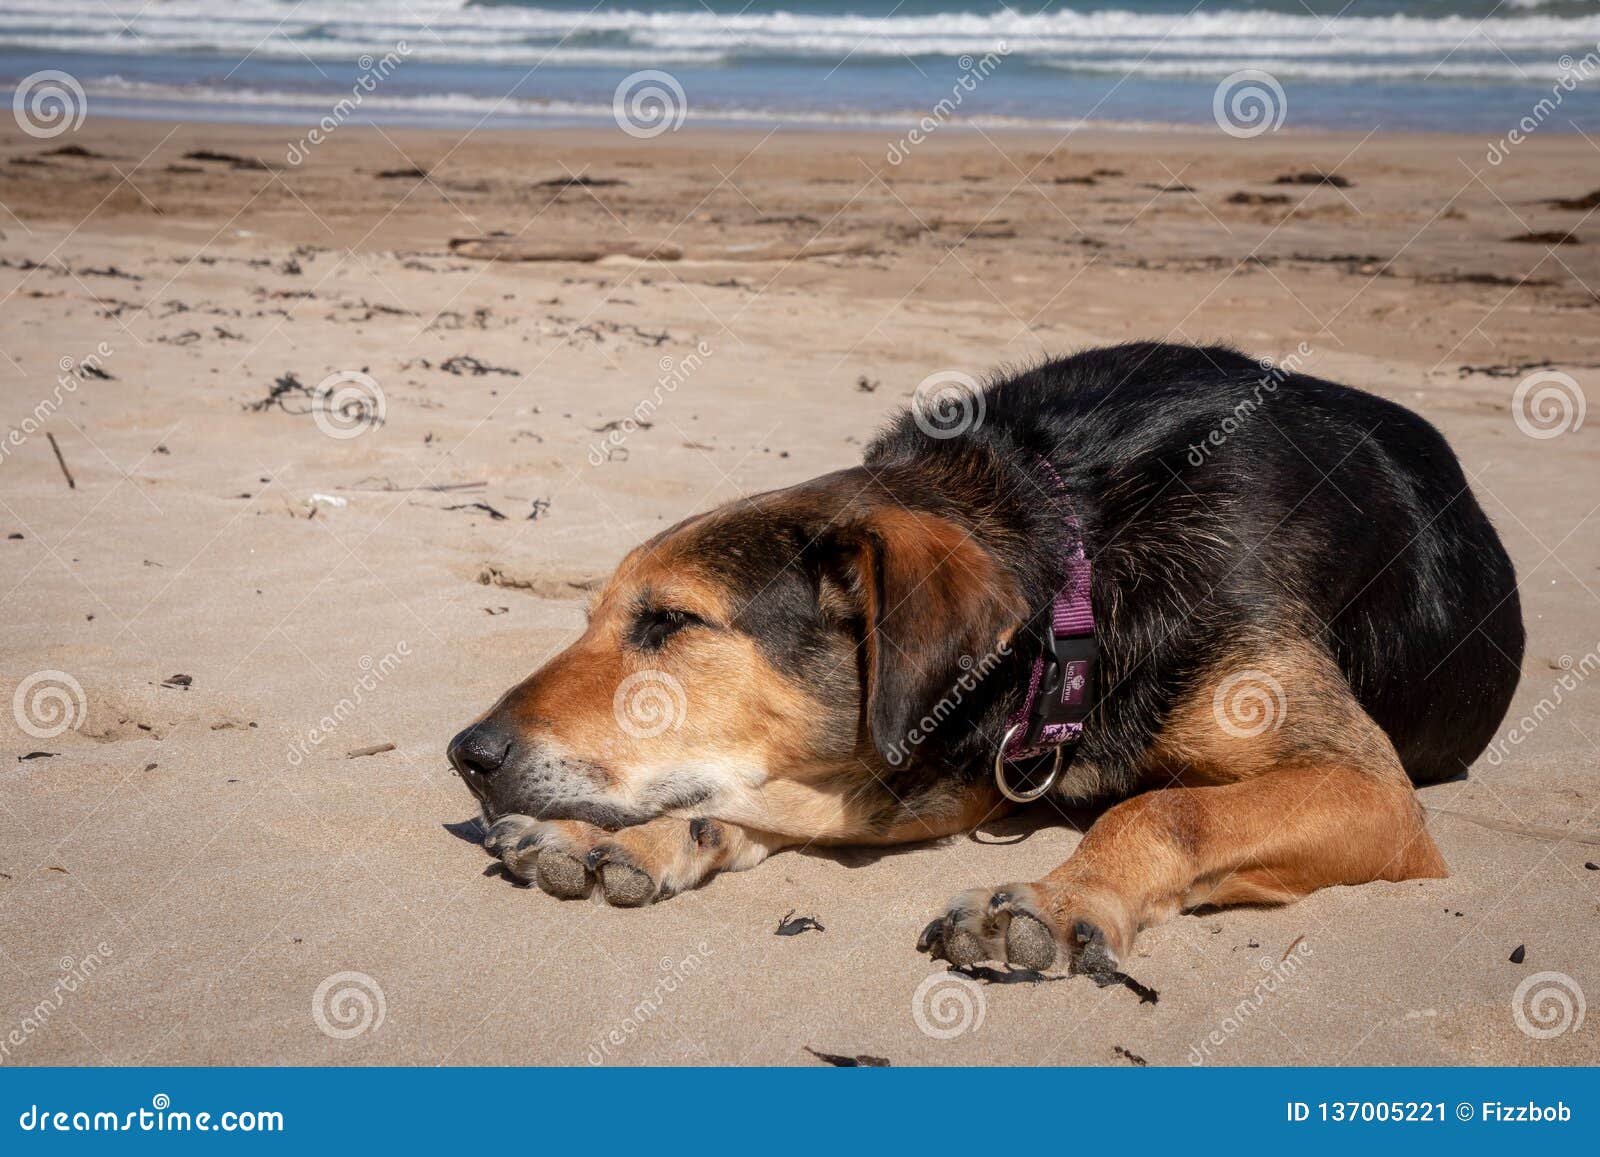 New Zealand Huntaway Lying On Beach In Sun Two Days After Retiring From Being A Full Time Sheepdog Stock Image Image Of Gisborne Black 137005221